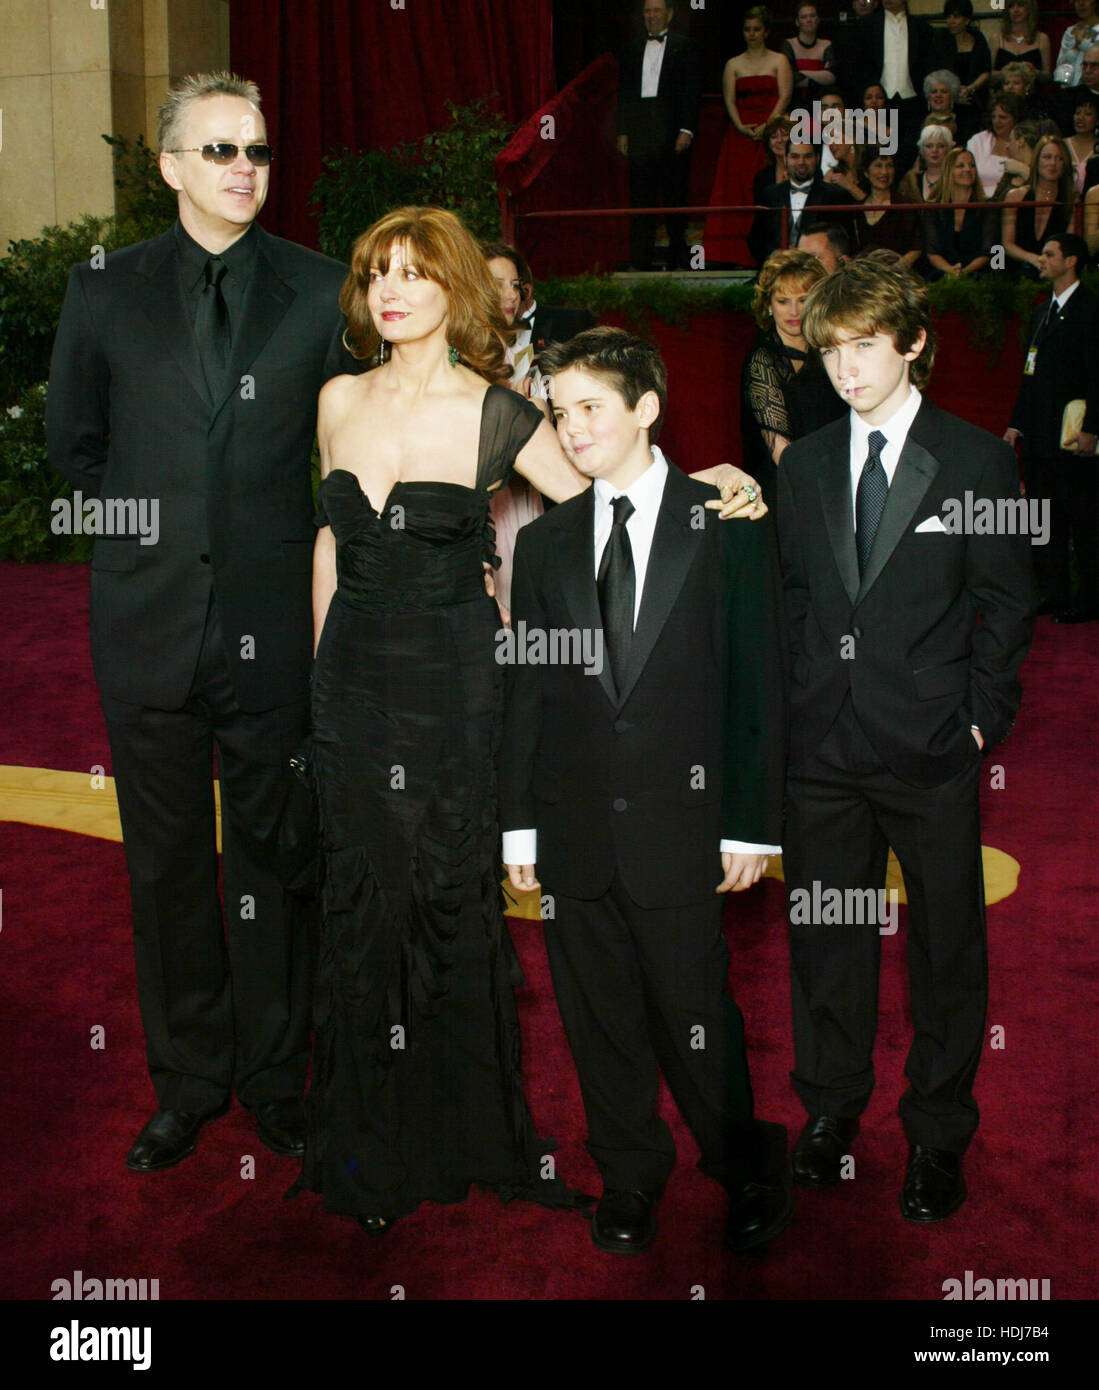 Tim Robbins and his wife, Susan Sarandon with sons, Miles Robbins, and Jack Robbins at the Academy Awards  in Hollywood,  California on February 29, 2004.  Photo credit: Francis Specker Stock Photo